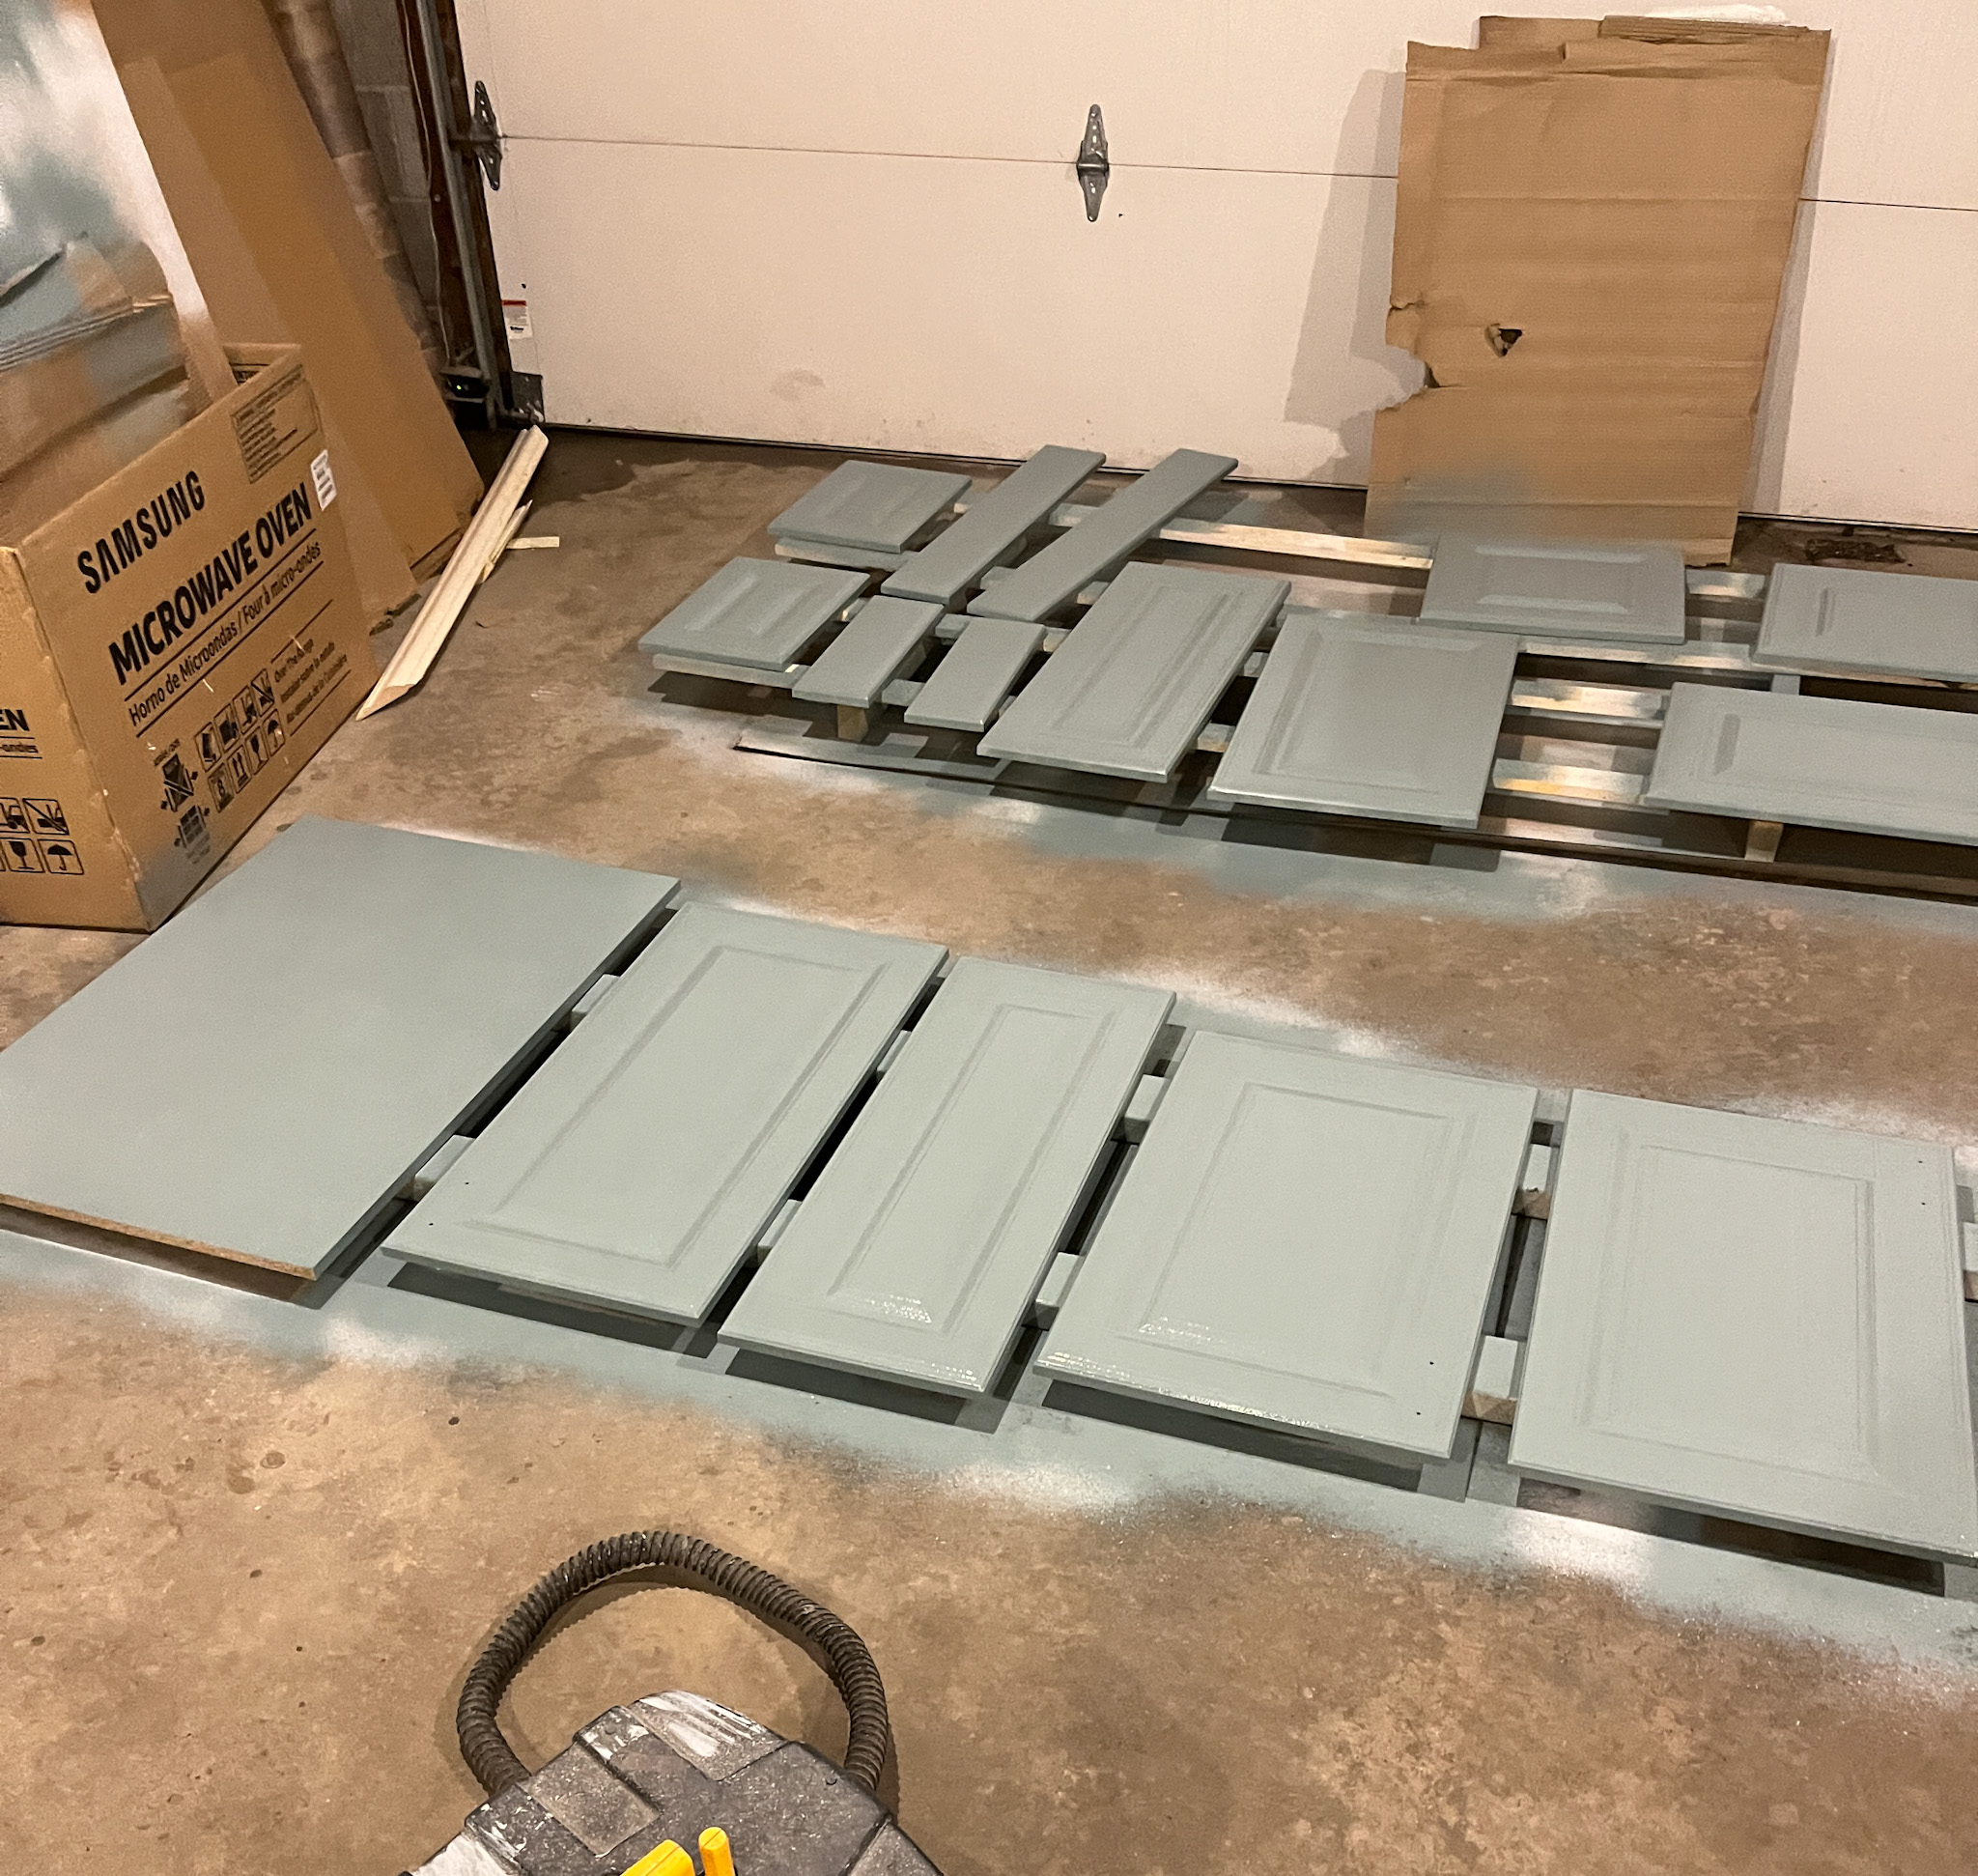 Painting cabinet doors blue with a sprayer